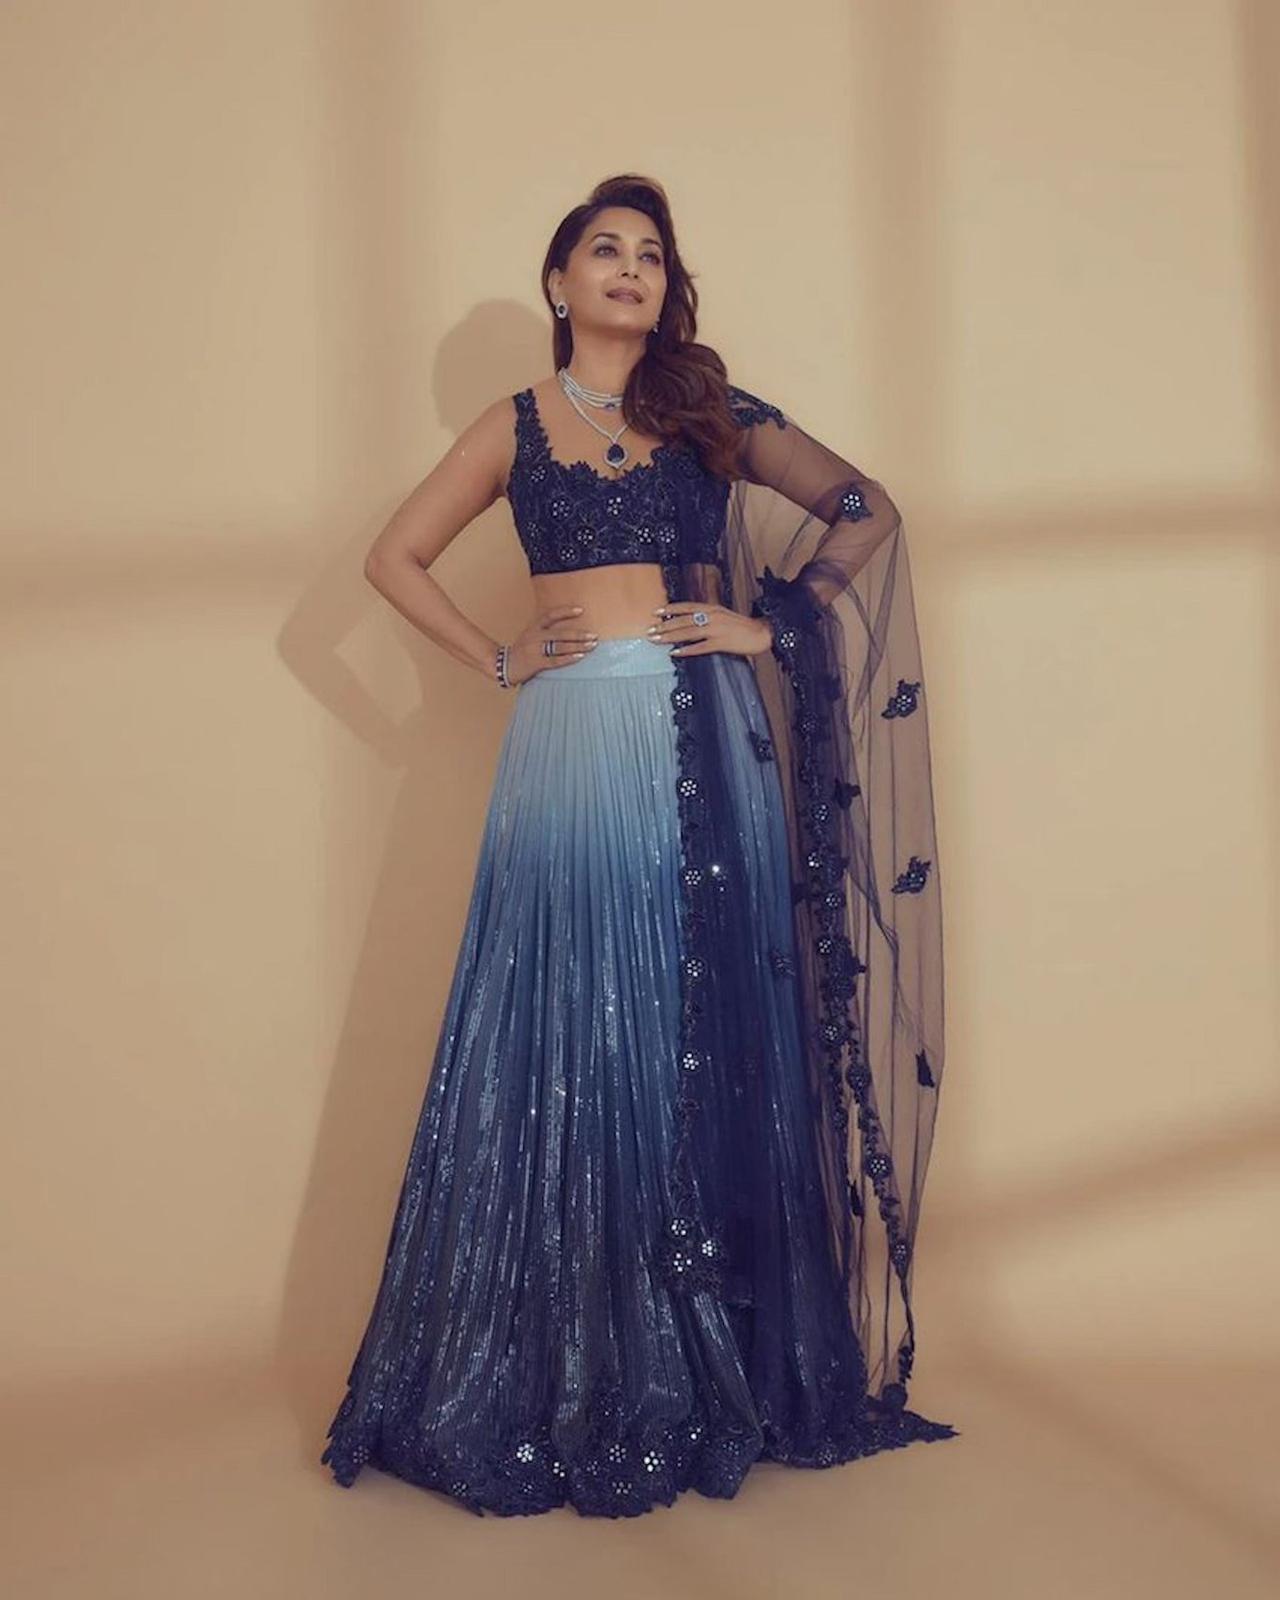 35 Latest Engagement Dresses for Women in India | Indian wedding gowns,  Cocktail gowns, Engagement dresses